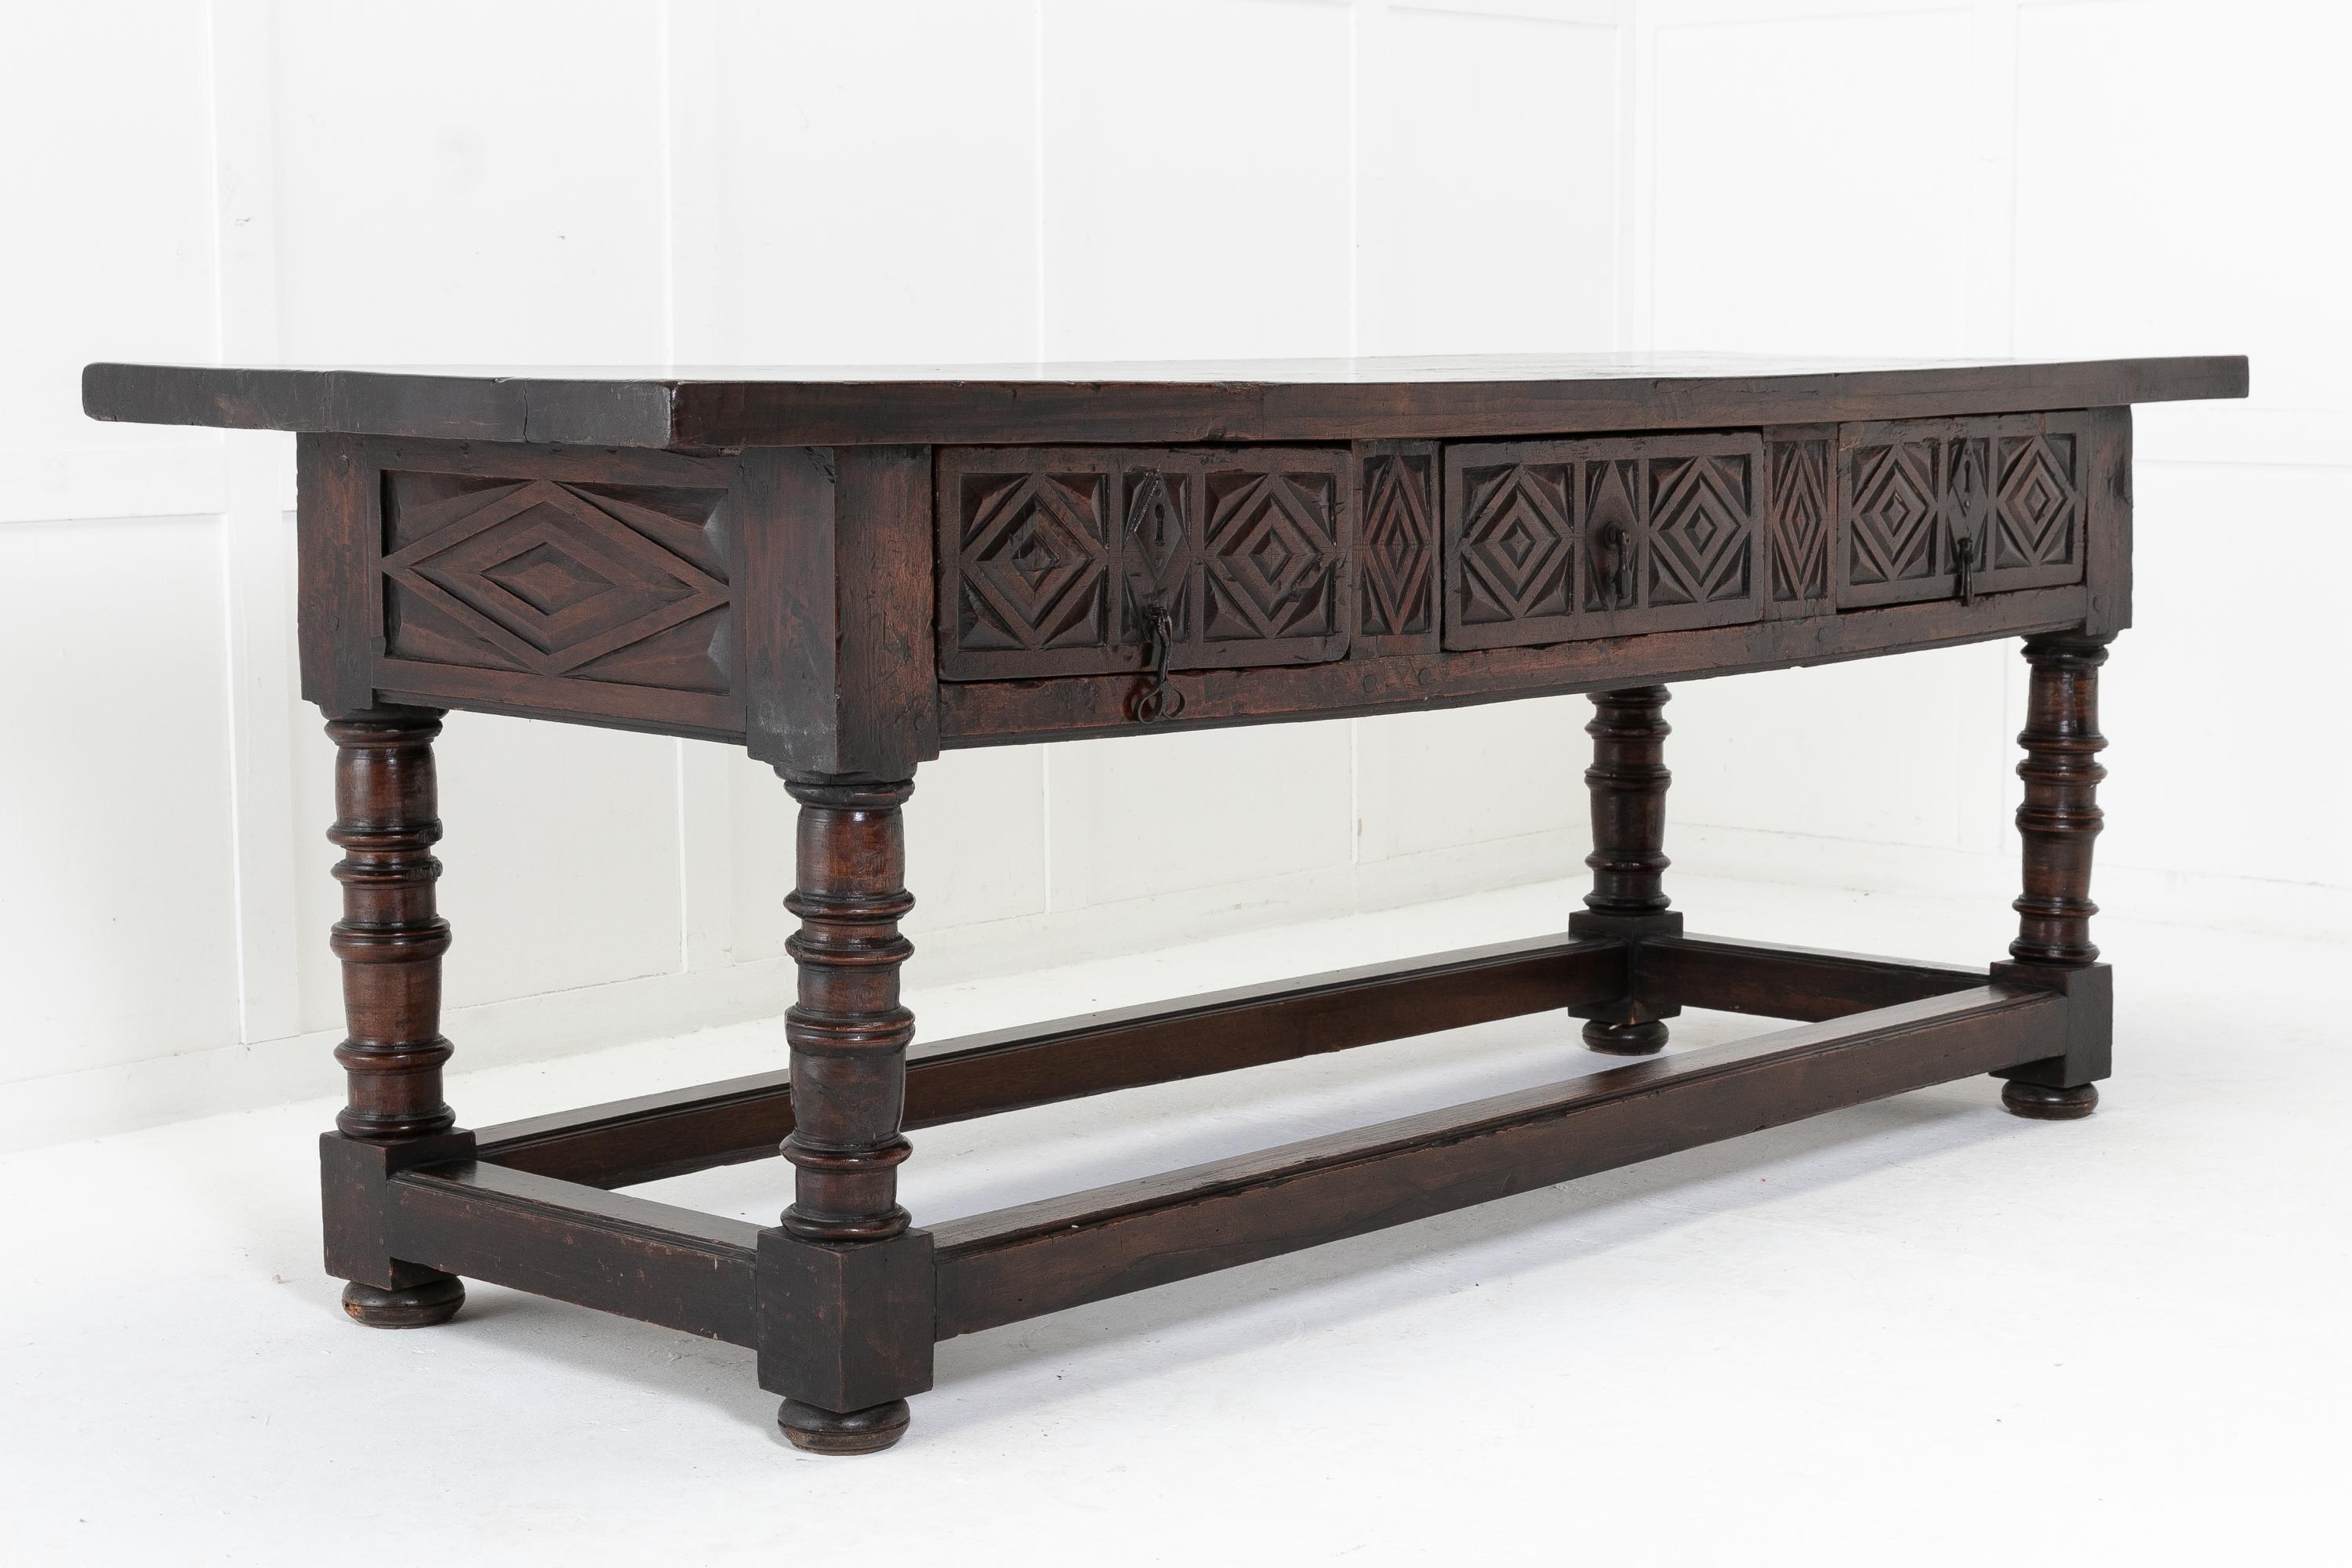 17th century Spanish provincial carved walnut side table with a single plank top above three chip carved frieze drawers creating nice geometric patterns. A substantial table, finished all round. Supported on turned gun barrel legs with peripheral